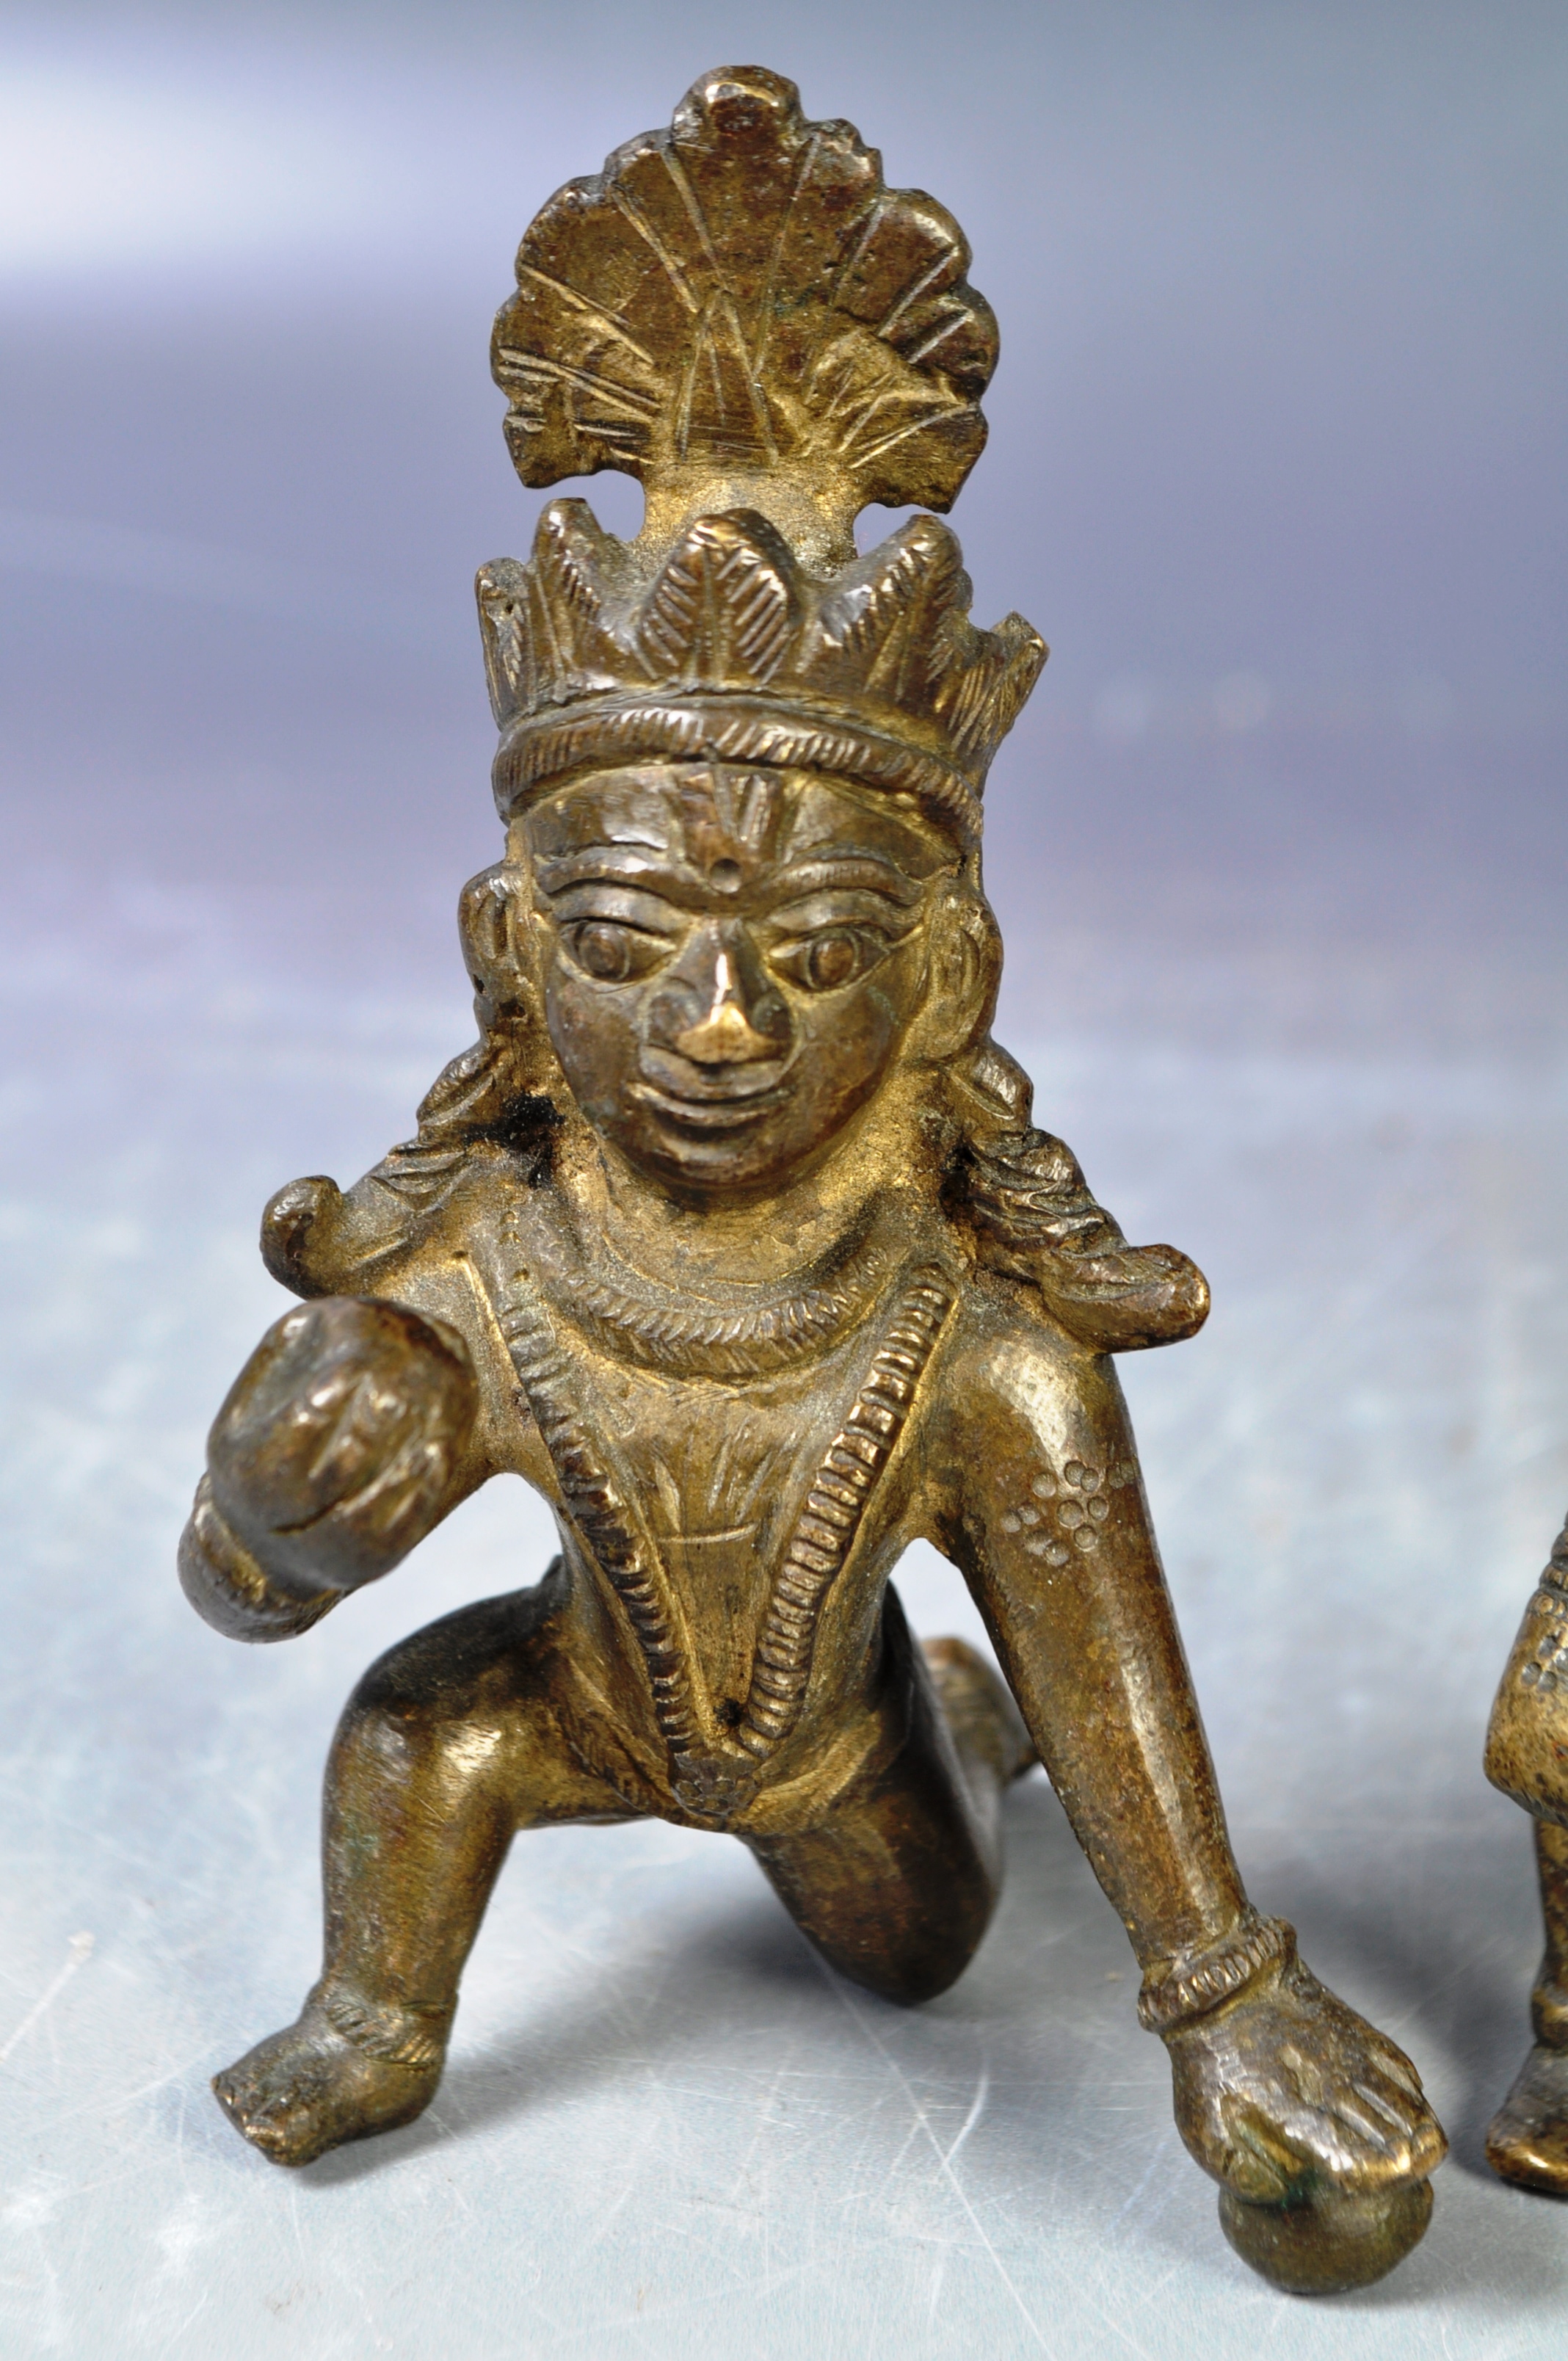 TWO ANTIQUE 19TH / 20TH INDIAN HINDU BRONZE FIGURINES OF KRISHNA - Image 2 of 6